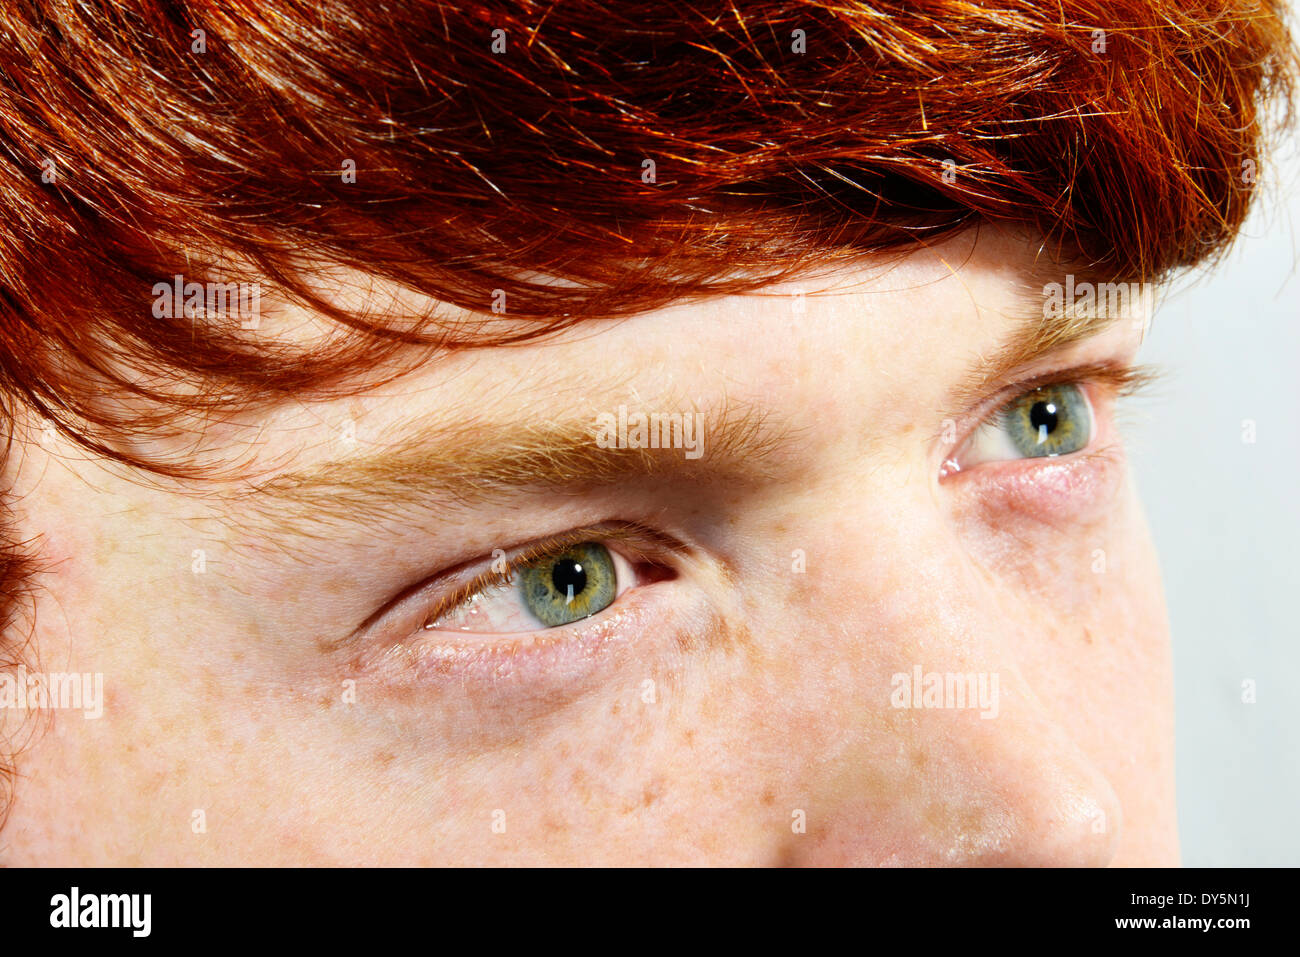 Upper facial shot of young man with red hair, freckles and green eyes looking up Stock Photo